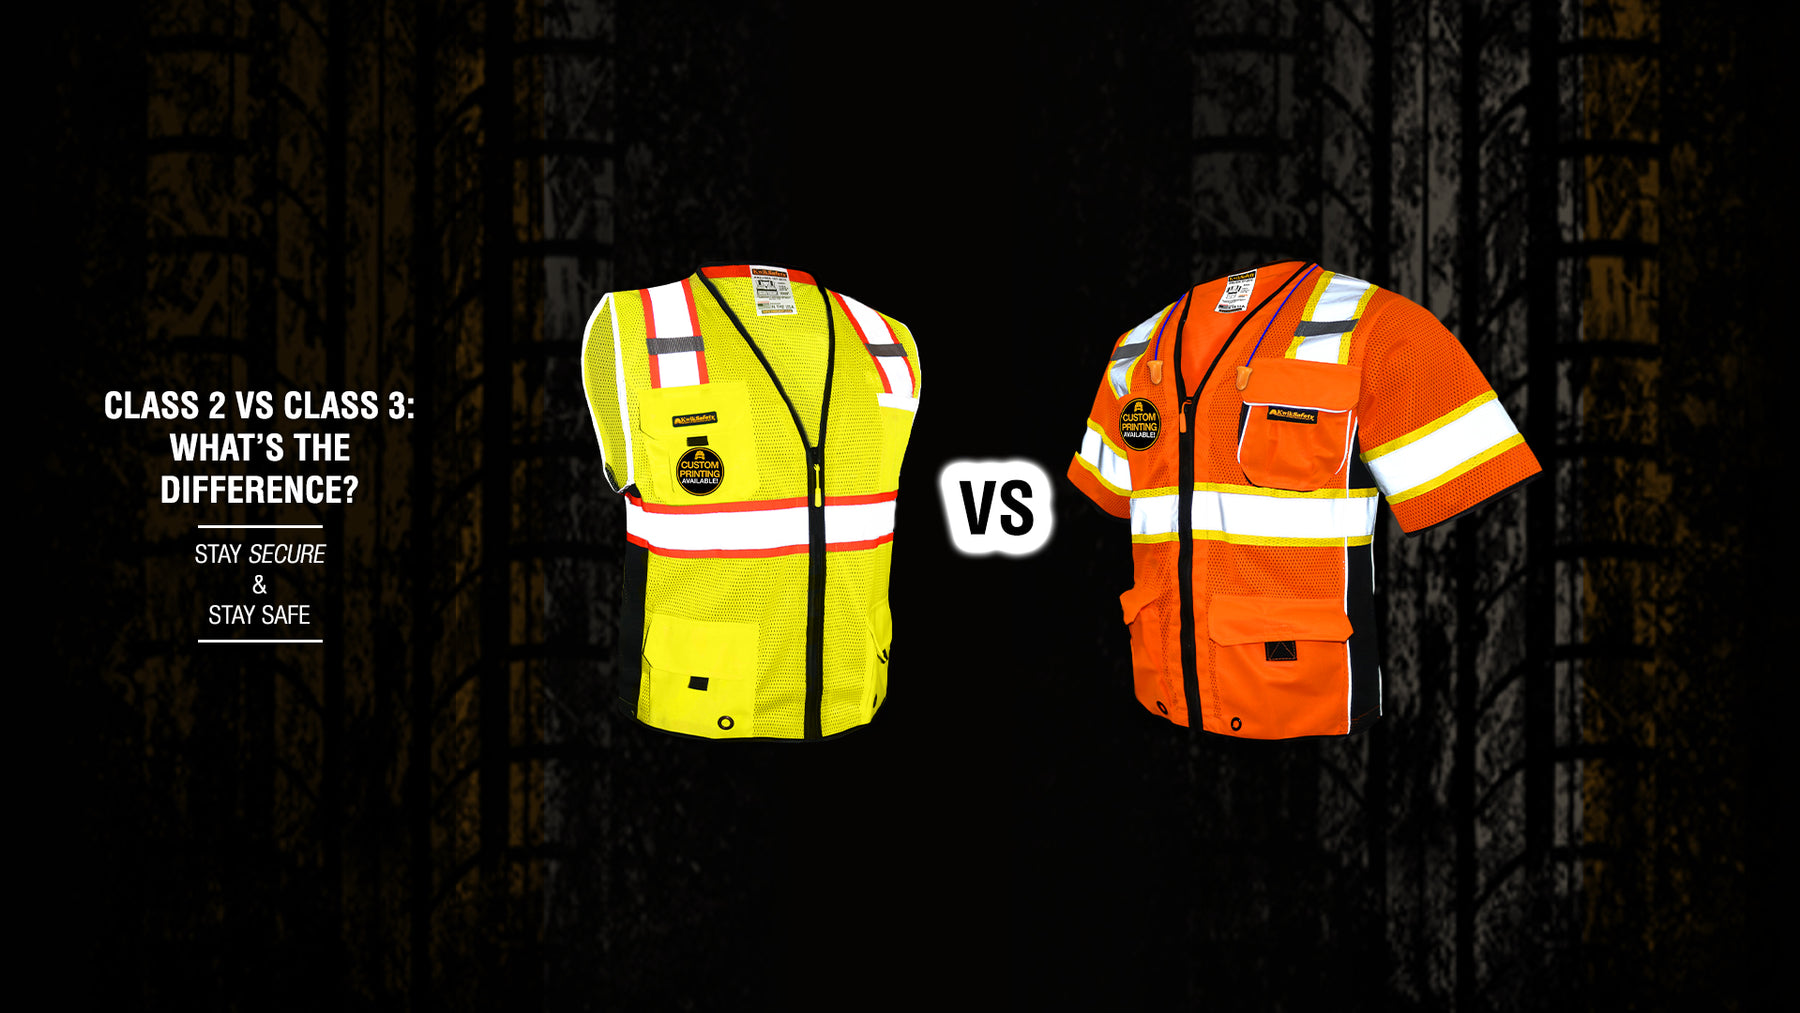 What's the difference between a Class 2 and Class 3 Safety Vest?